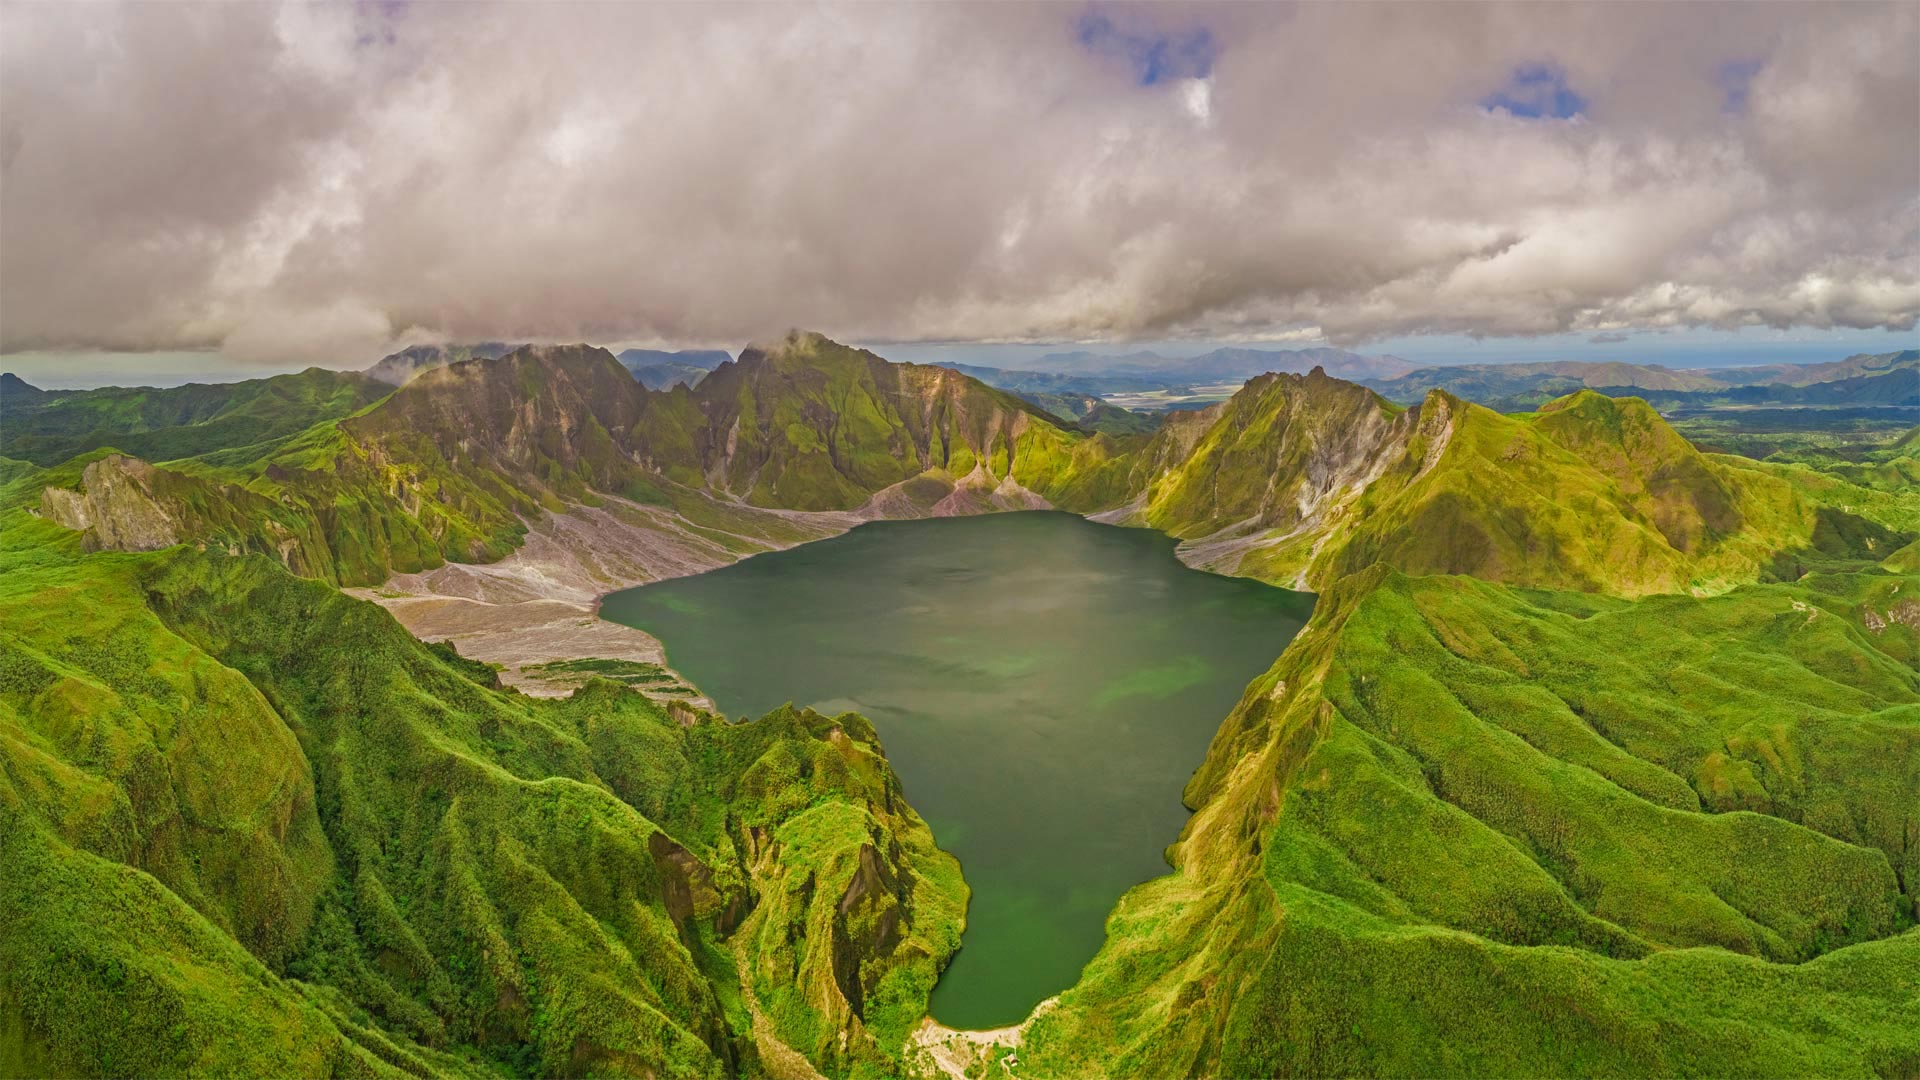 Aerial view of volcanic Lake Pinatubo and mountains, Luzon, Philippines - Amazing Aerial Agency/Offset by Shutterstock)